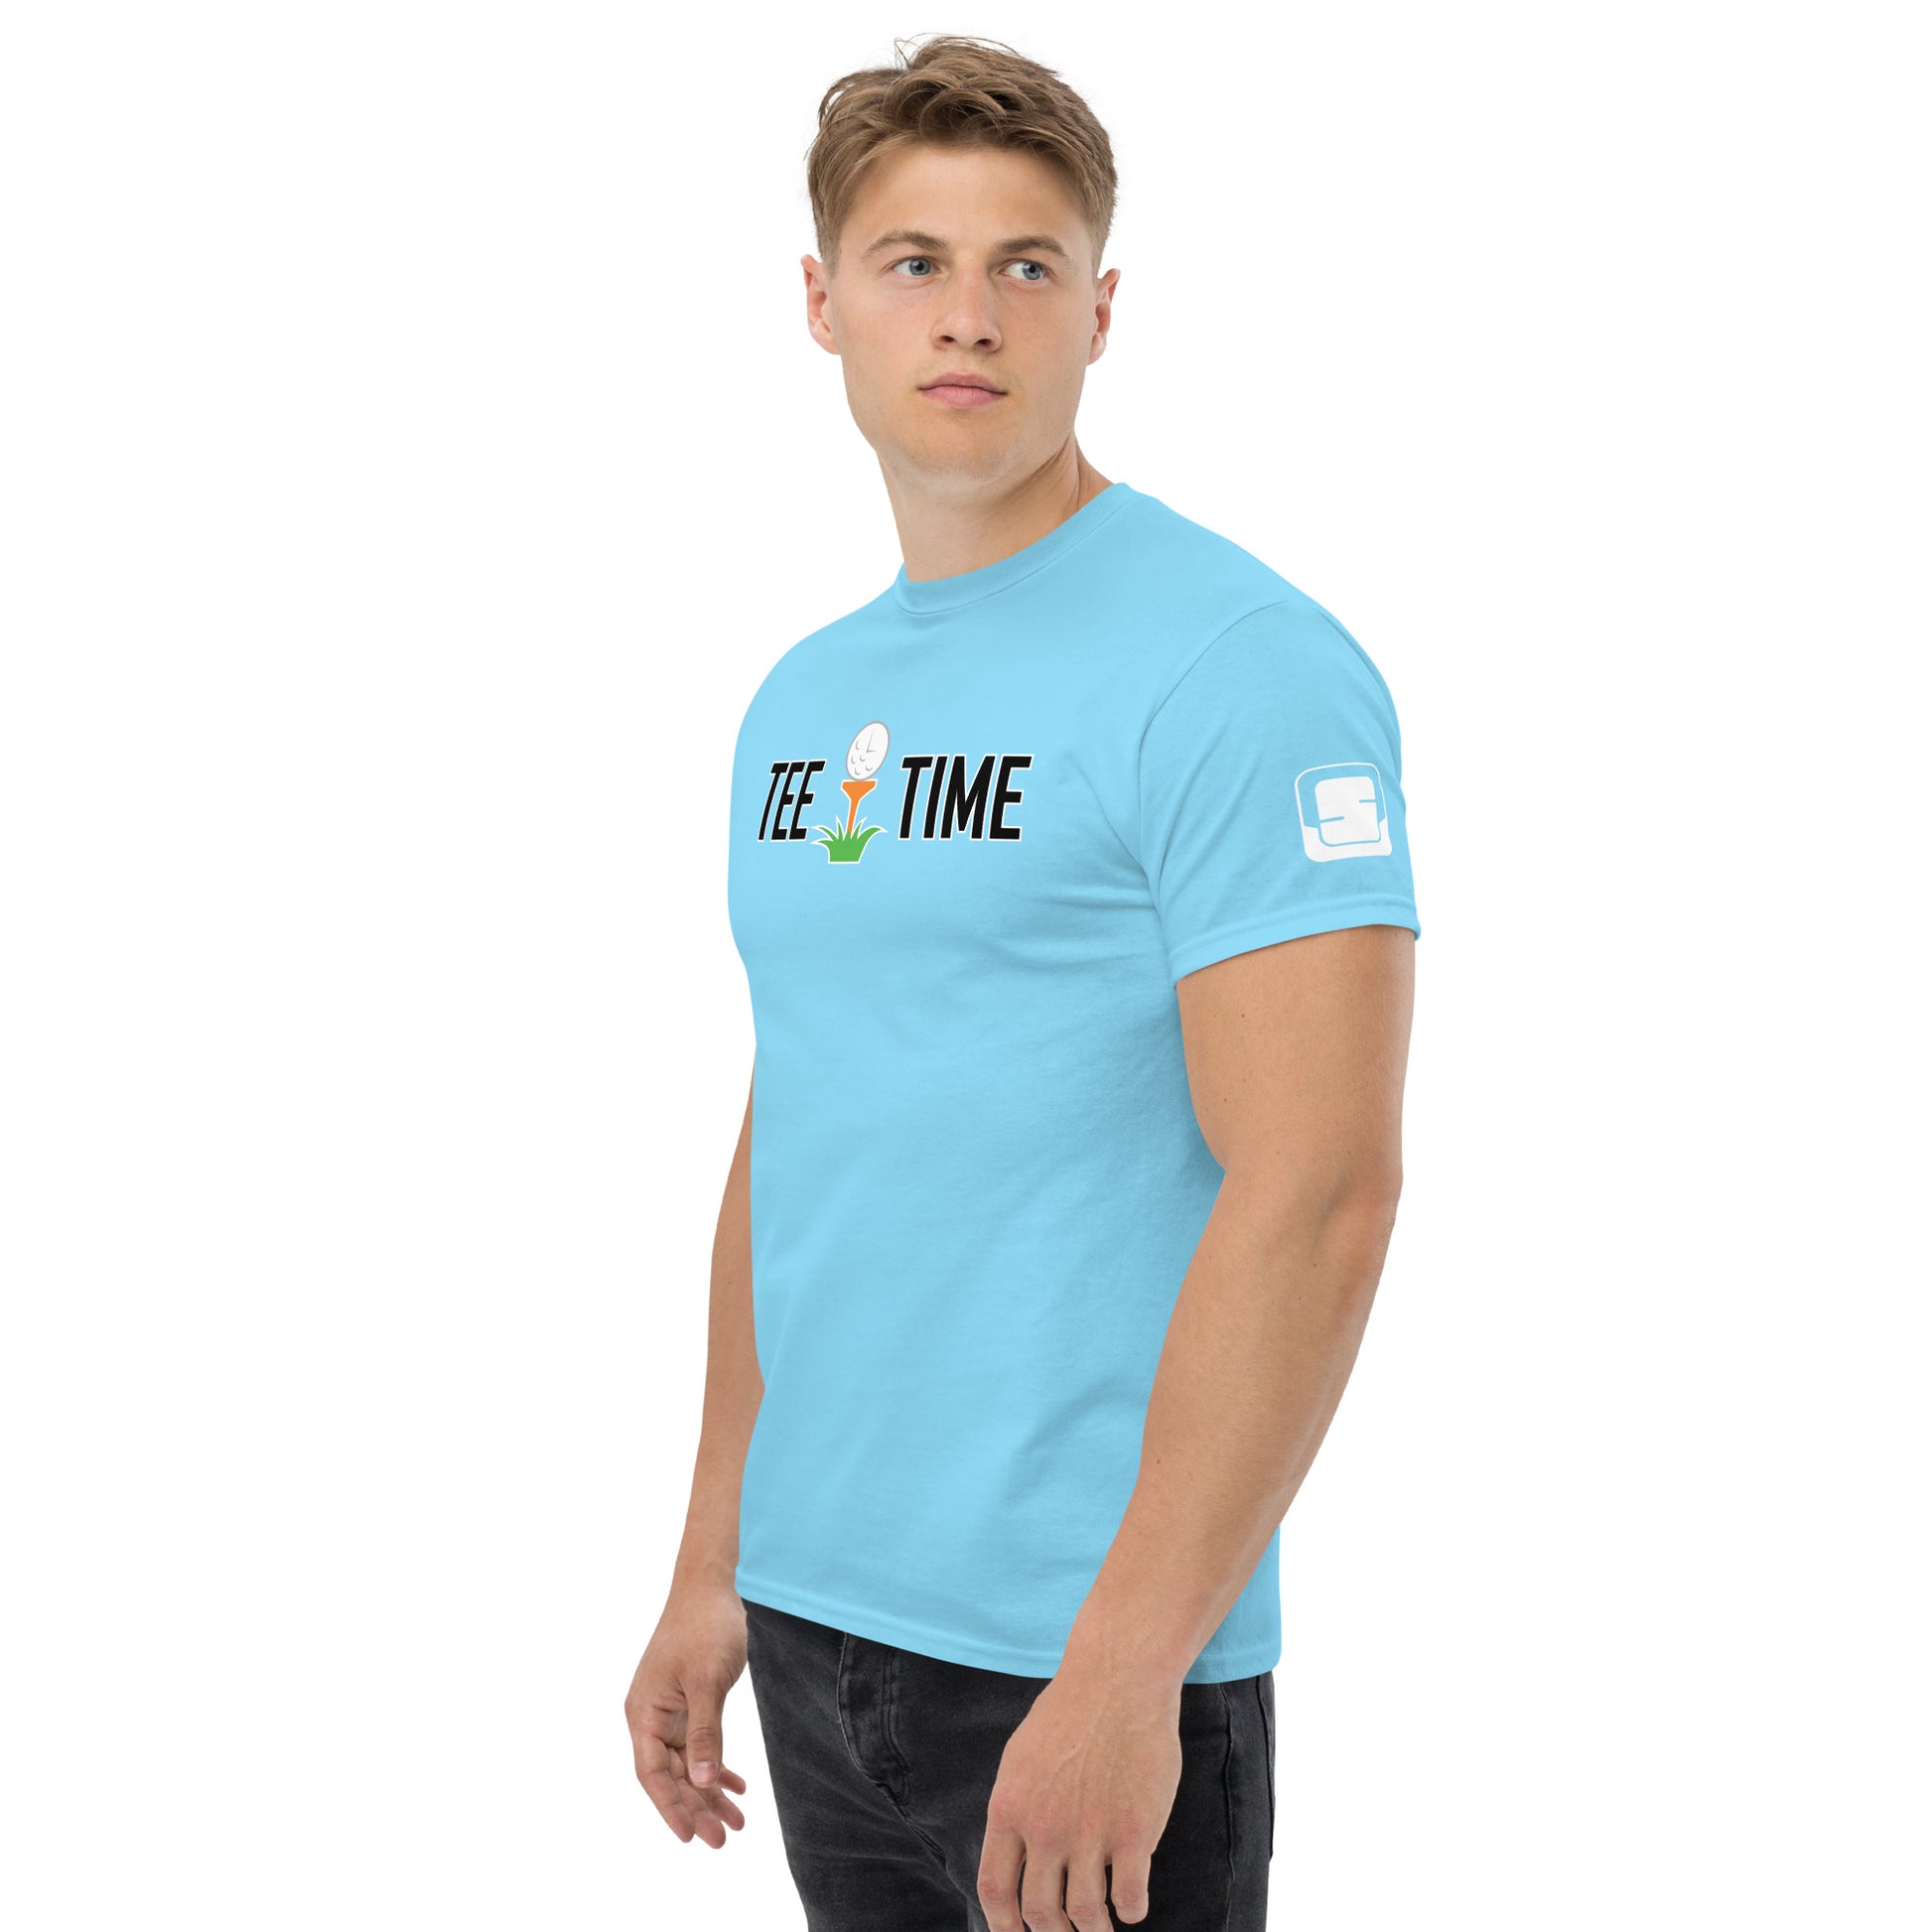 A young man models a light blue t-shirt featuring the phrase "TEE TIME" with an illustration of a golf ball on a tee above grass. He looks off to the side with a focused expression. The shirt has a small square logo on the sleeve. His hairstyle is neat, and he wears dark pants, complementing the casual yet stylish tee. The background is neutral, emphasizing the shirt's design and the model's clean-cut presentation.